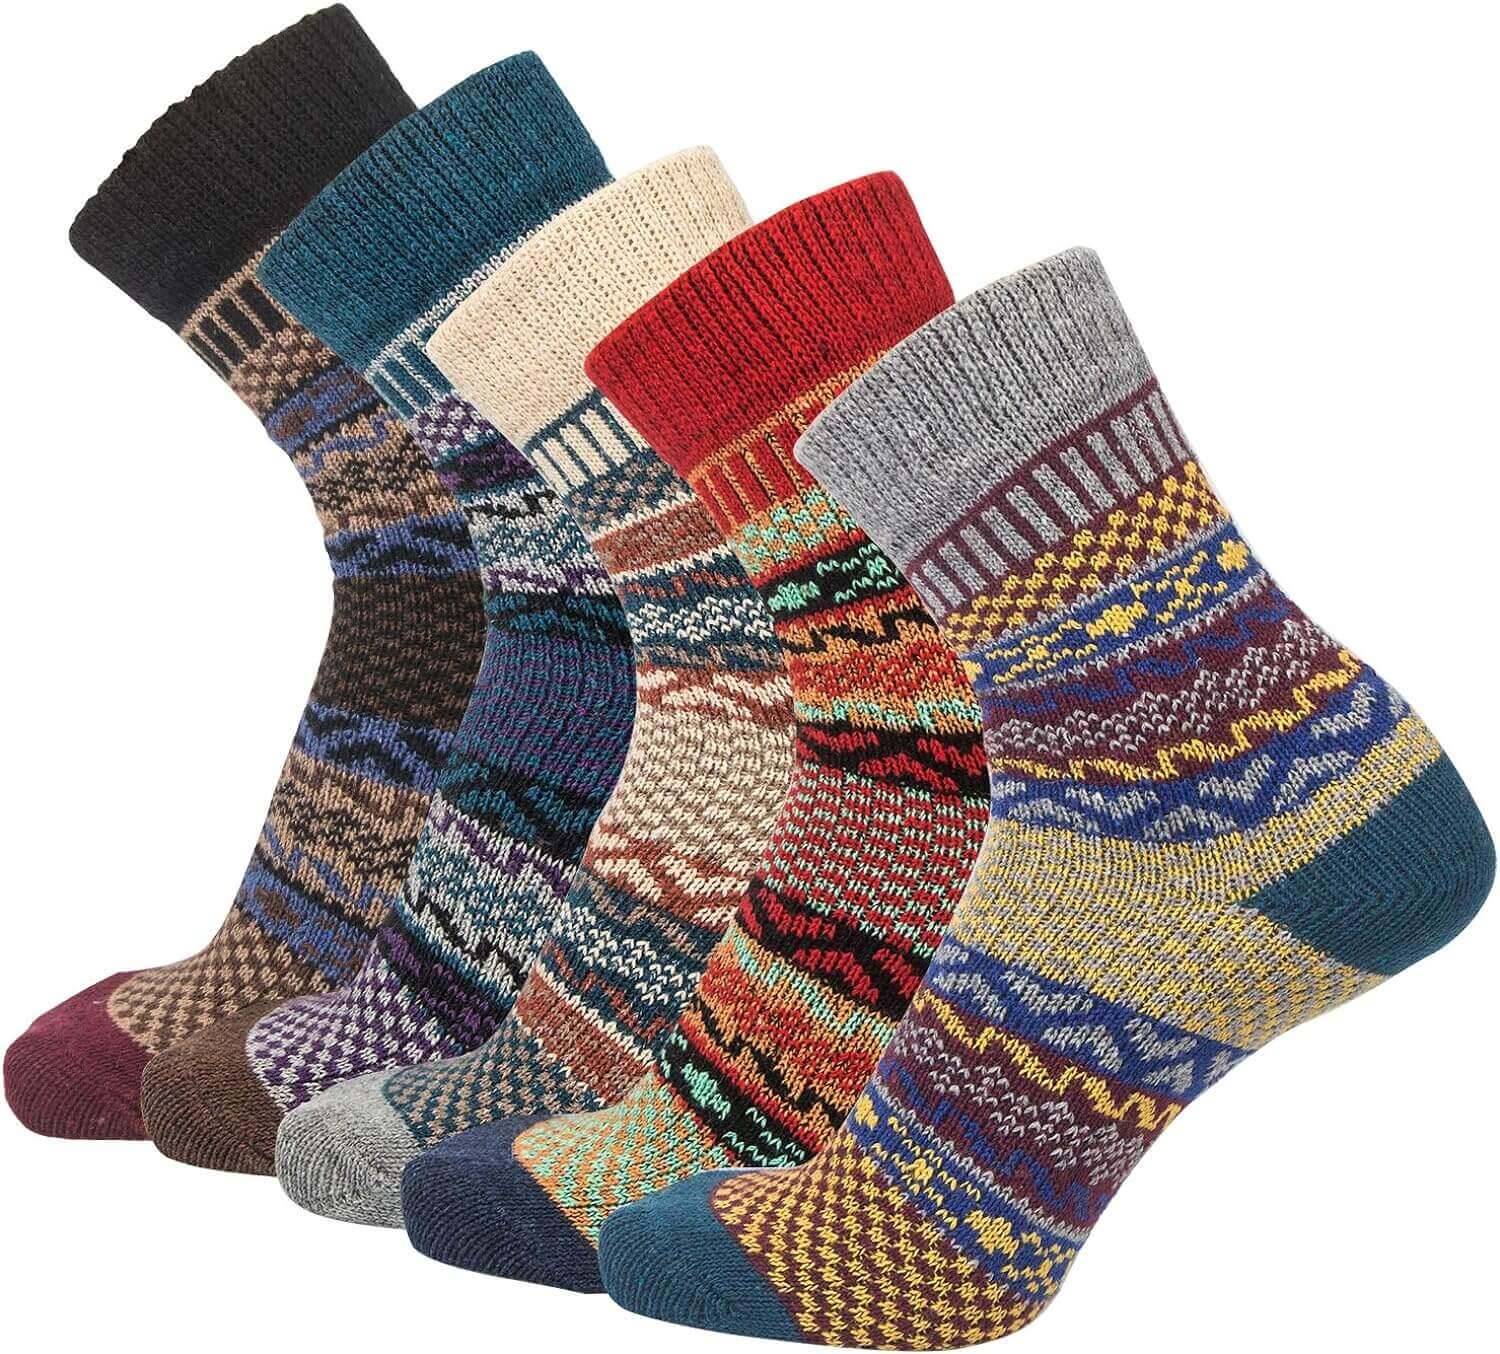 Shop The Latest >5 Pack Women's Thick Knit Wool Socks Winter Warm Socks > *Only $24.29*> From The Top Brand > *Senker Fashionl* > Shop Now and Get Free Shipping On Orders Over $45.00 >*Shop Earth Foot*